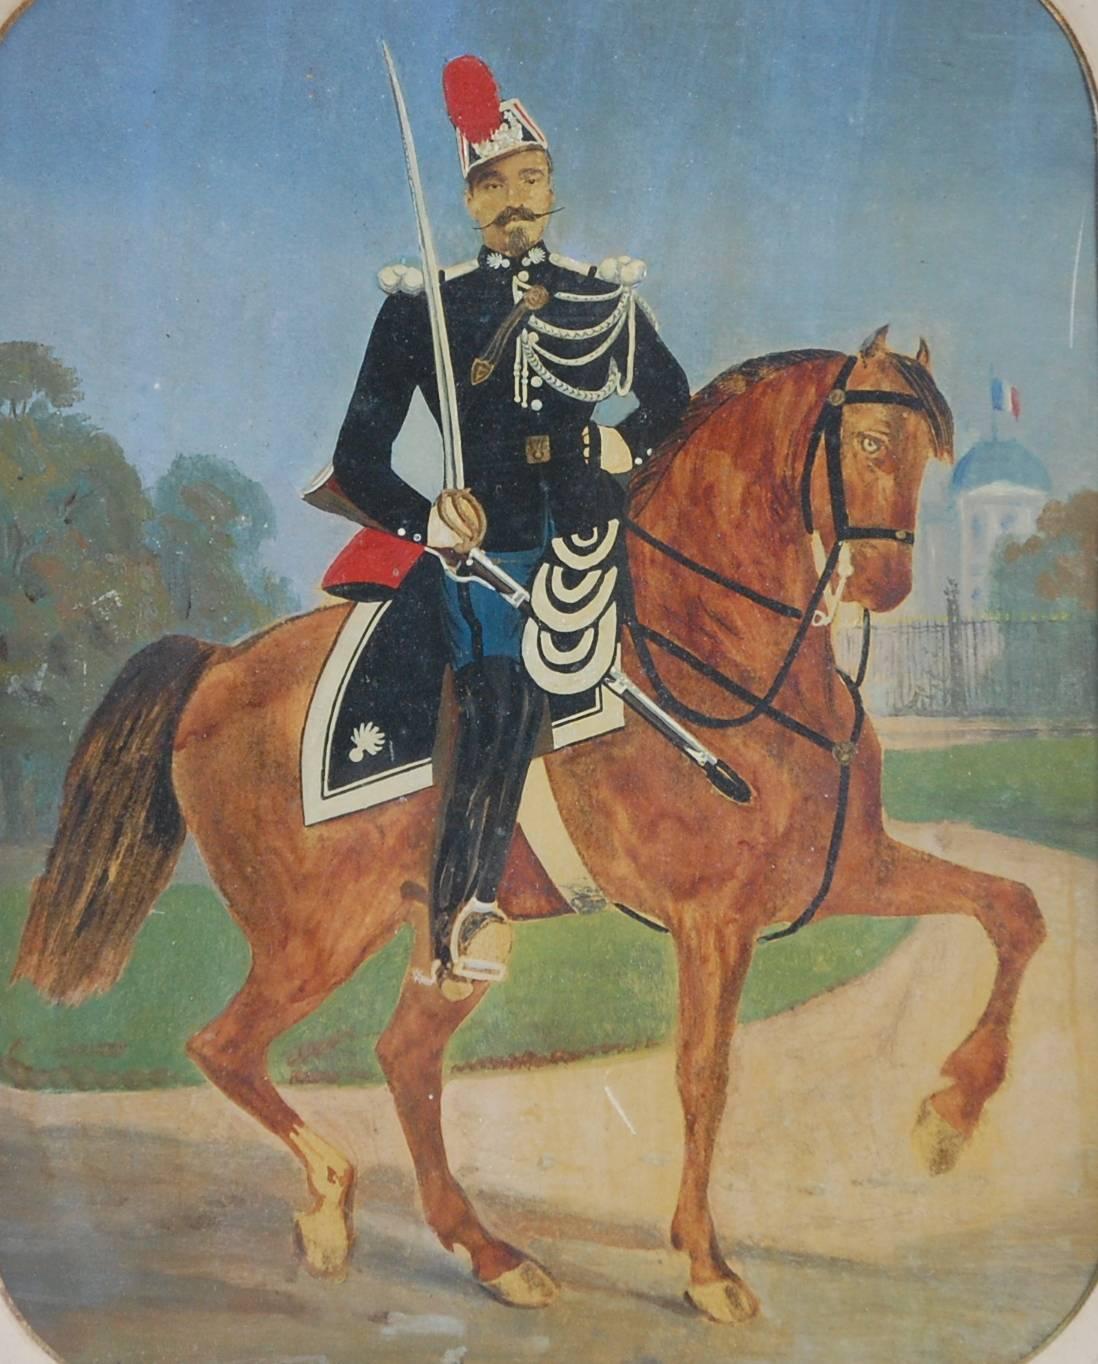 Wonderful naive painting of a French Cavalryman in his pomp and finery, his Chateau flying the Tricolor in the background. Original, although overpainted frame. This painting is in original condition and totally unrestored, it has aged well but